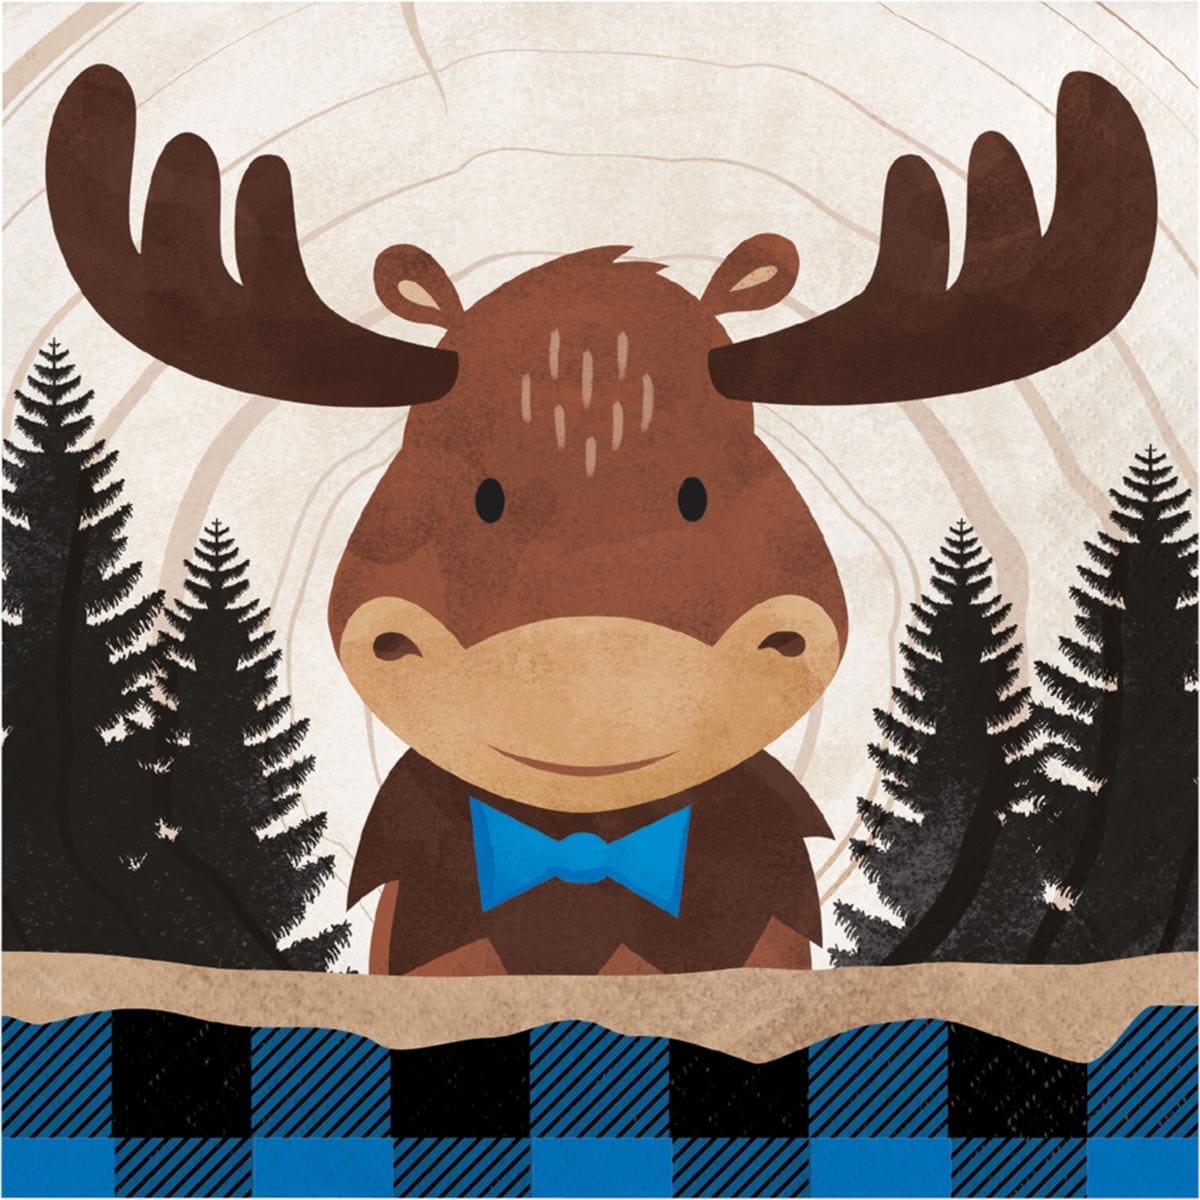 Buy 1st Birthday Moose Buffalo Plaid Lunch Napkins, 16 Count sold at Party Expert